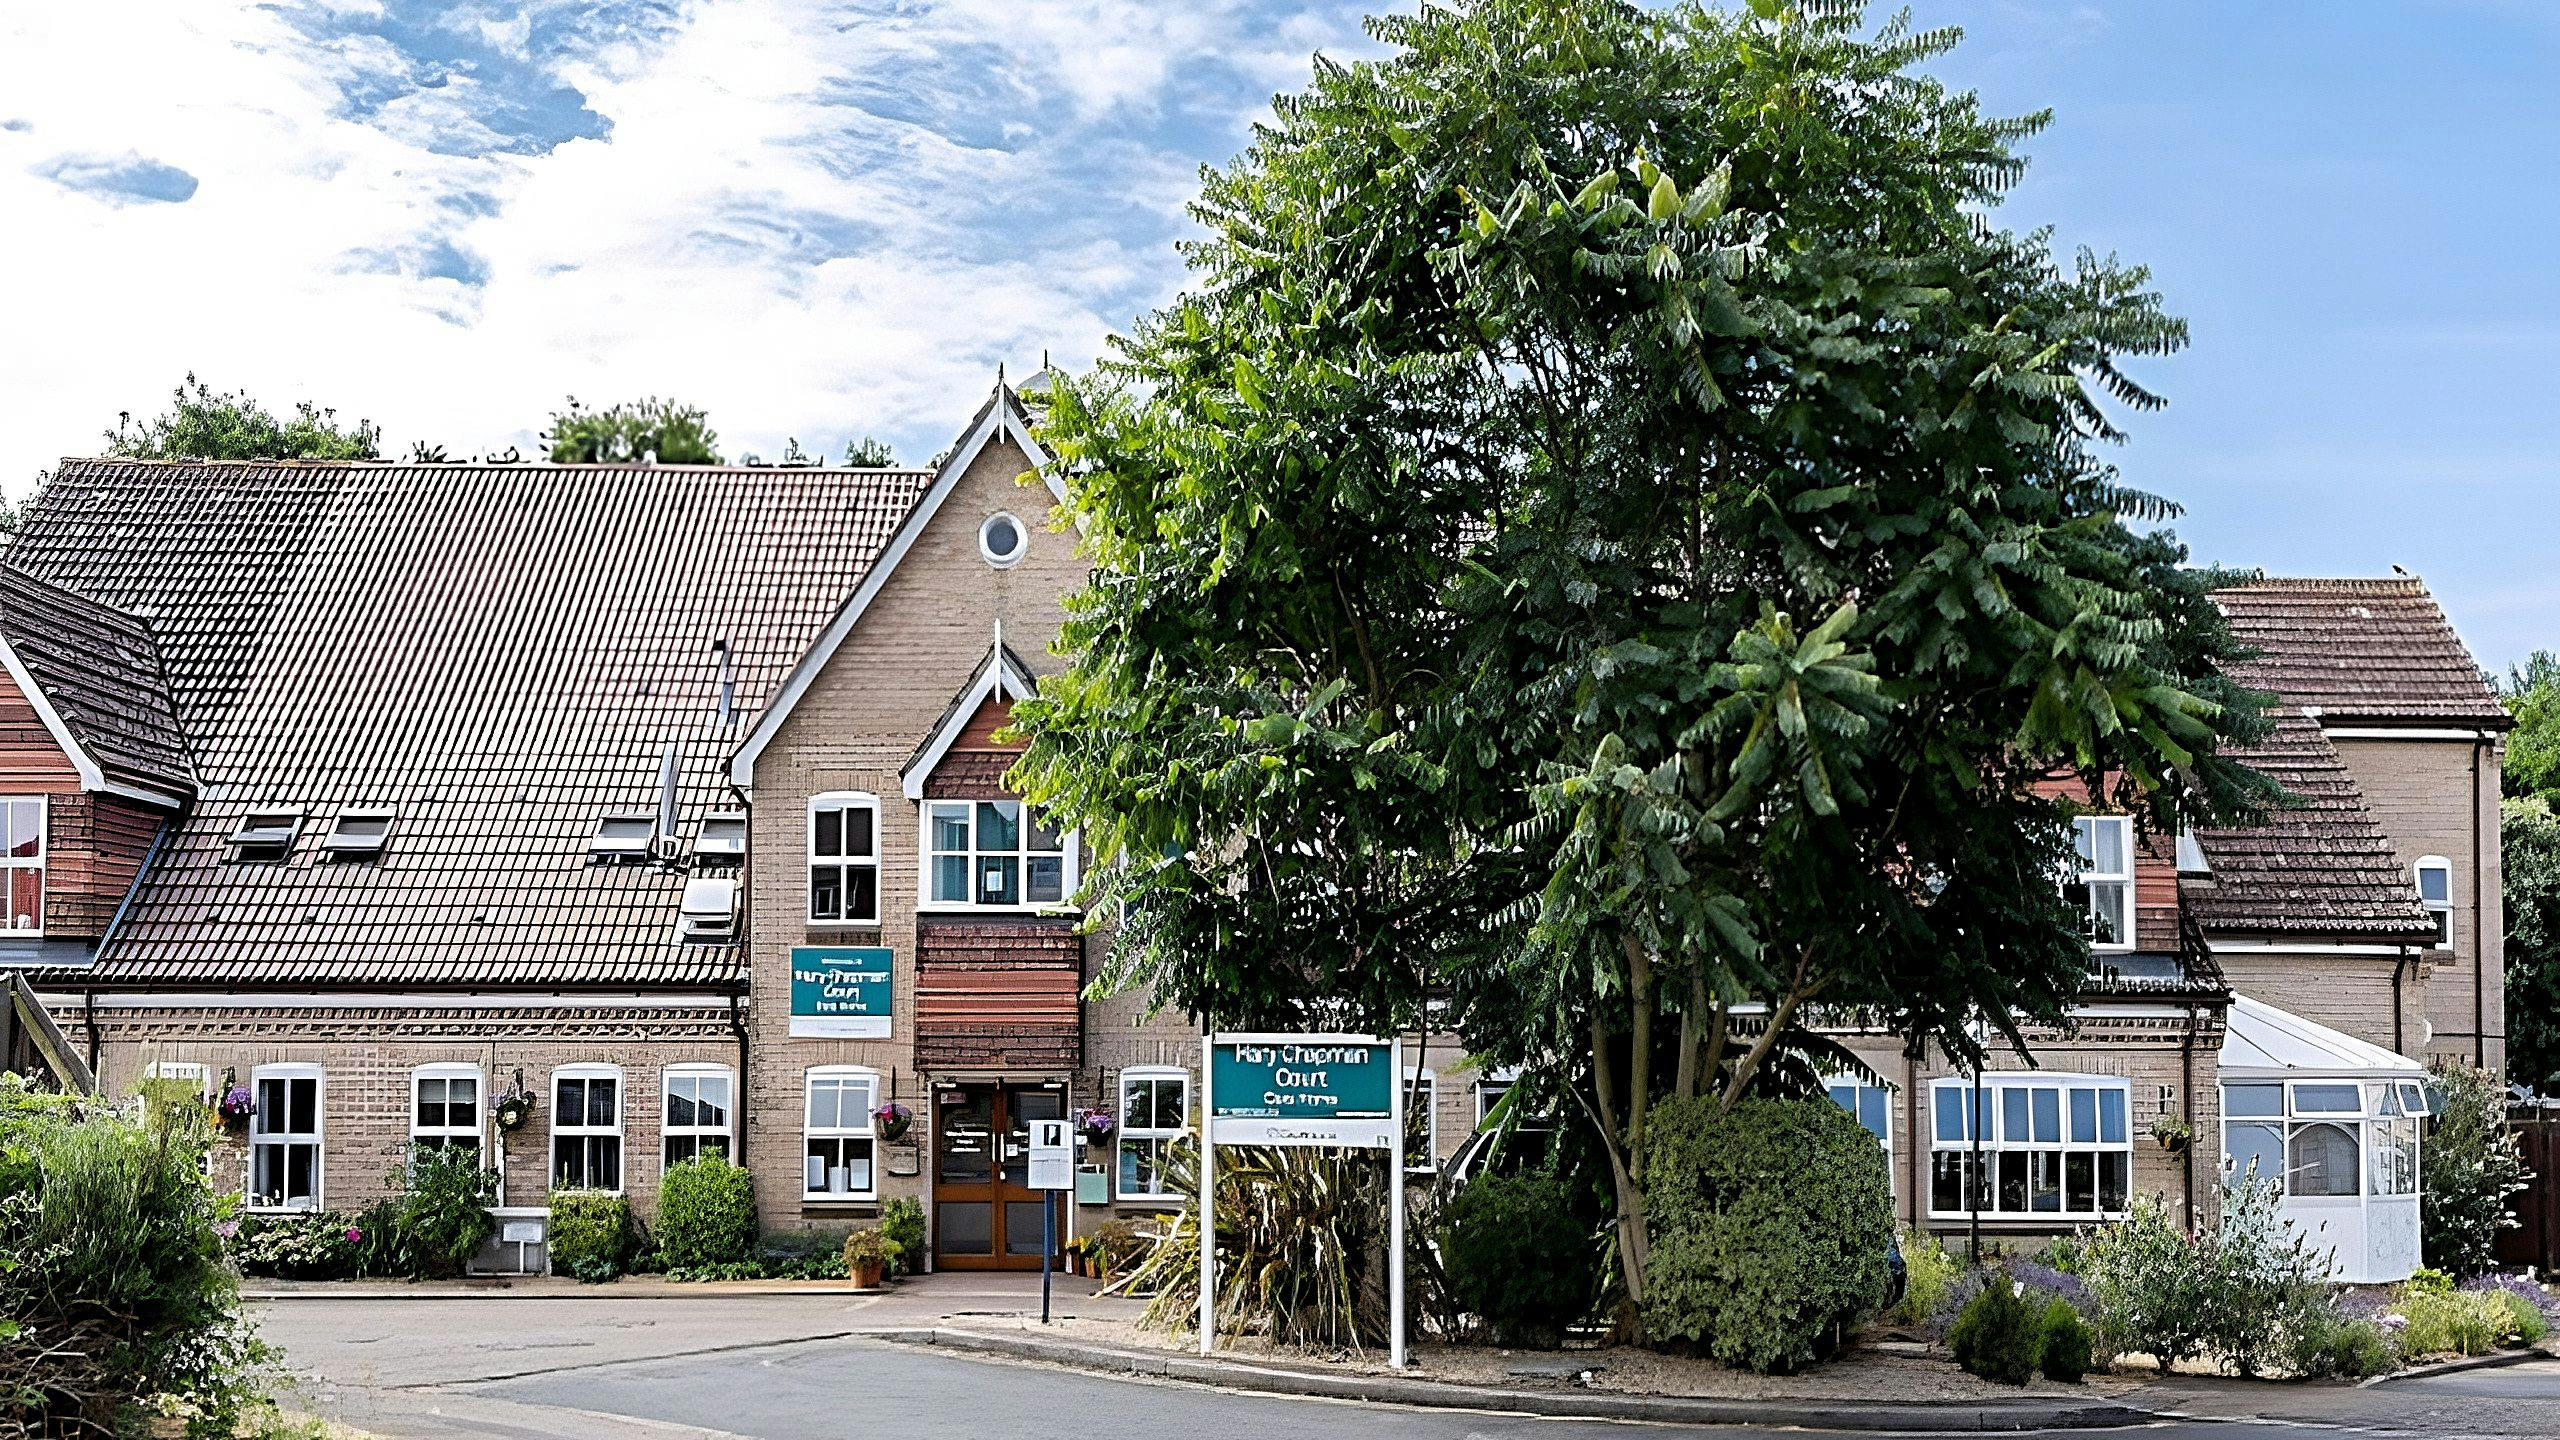 Countrywide - Mary Chapman Court care home 3